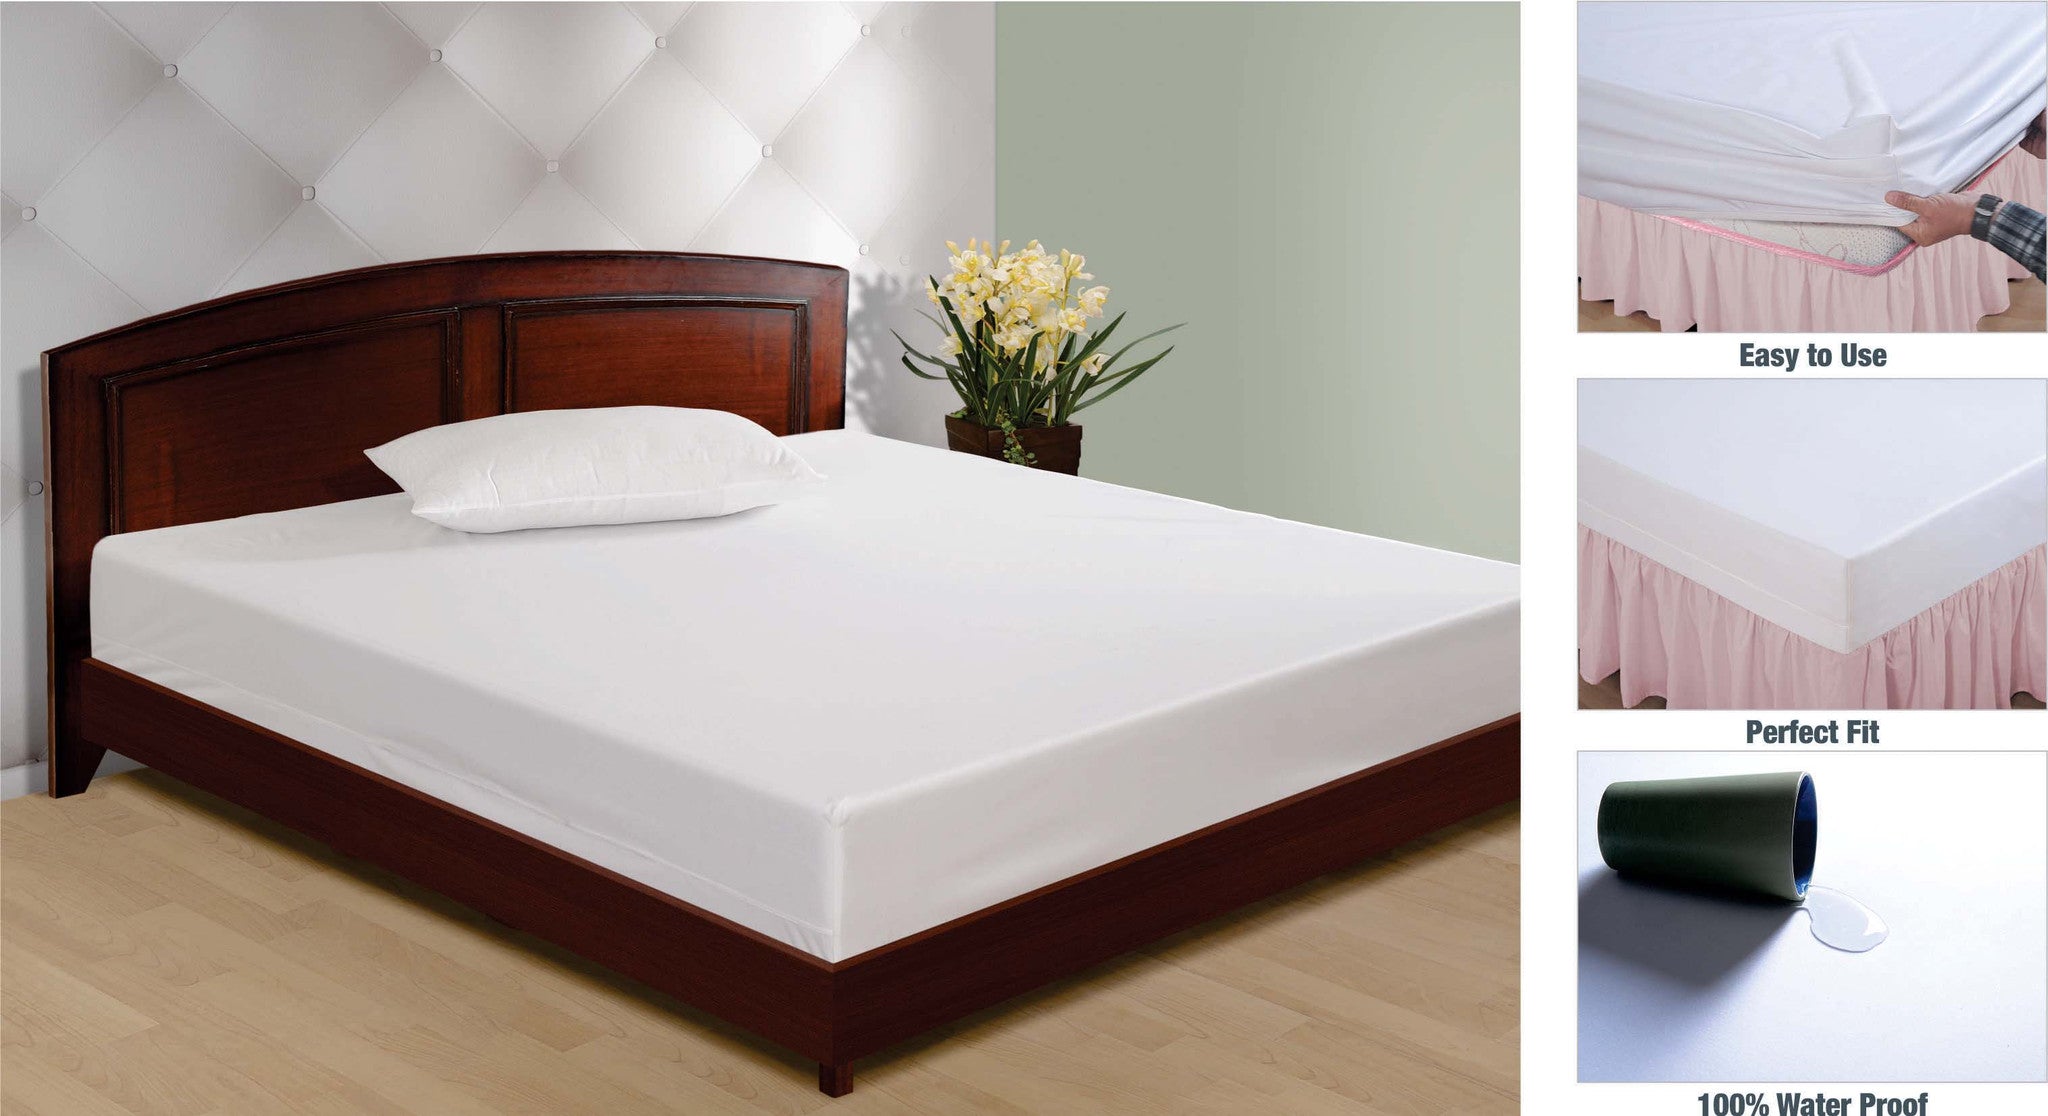 Tips for Buying the Right Mattress Protector